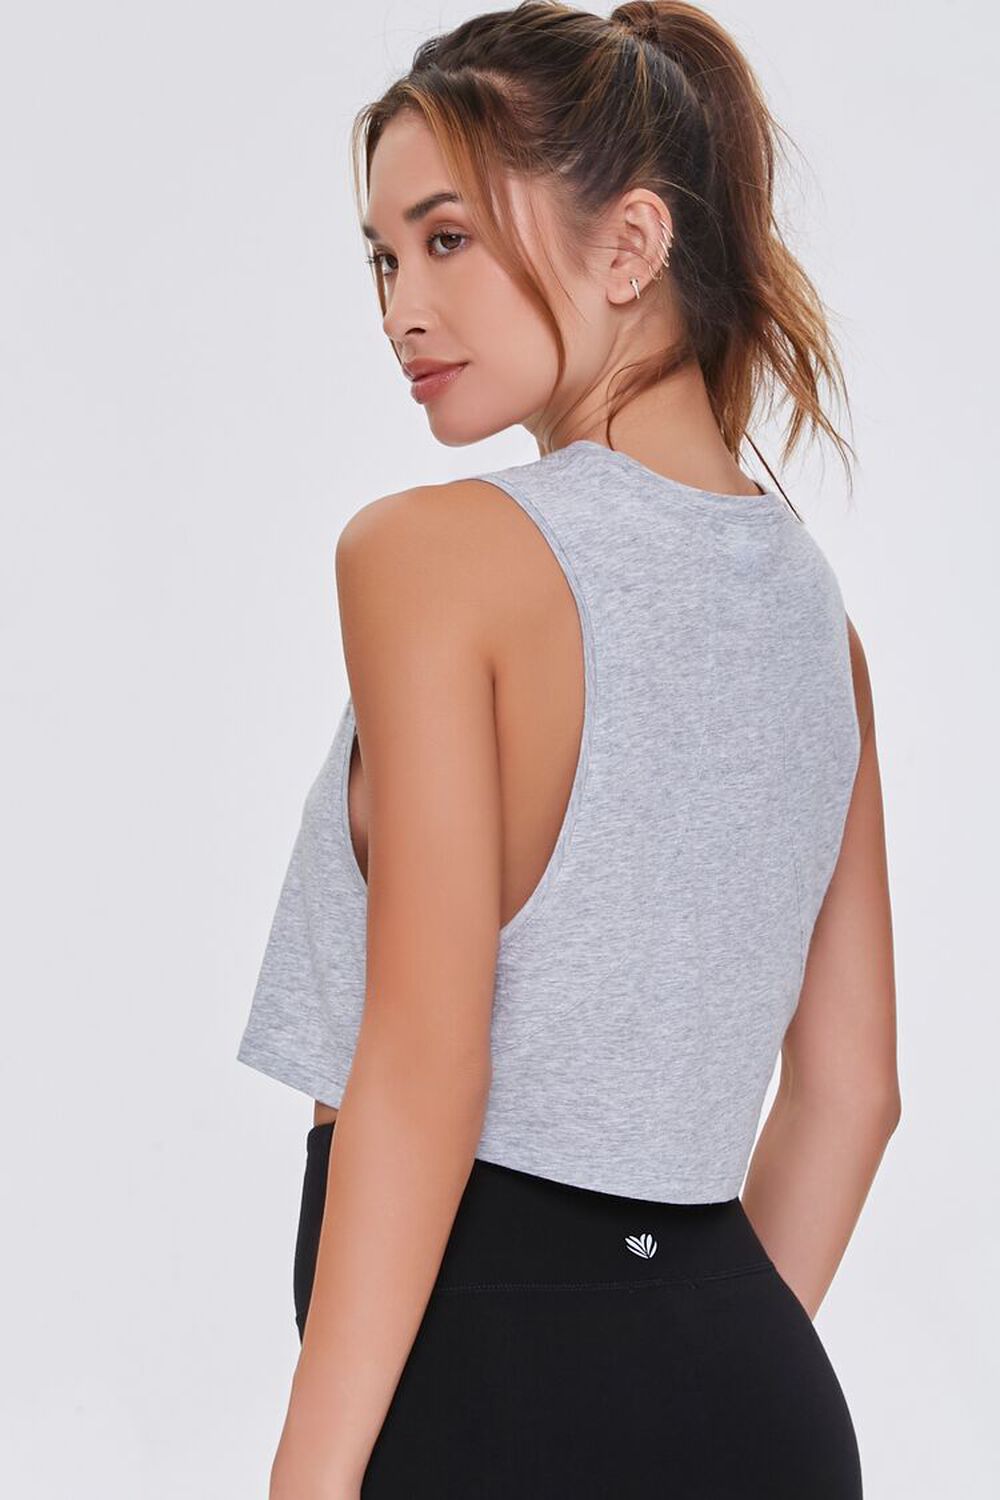 HEATHER GREY Cropped Muscle Tee, image 3